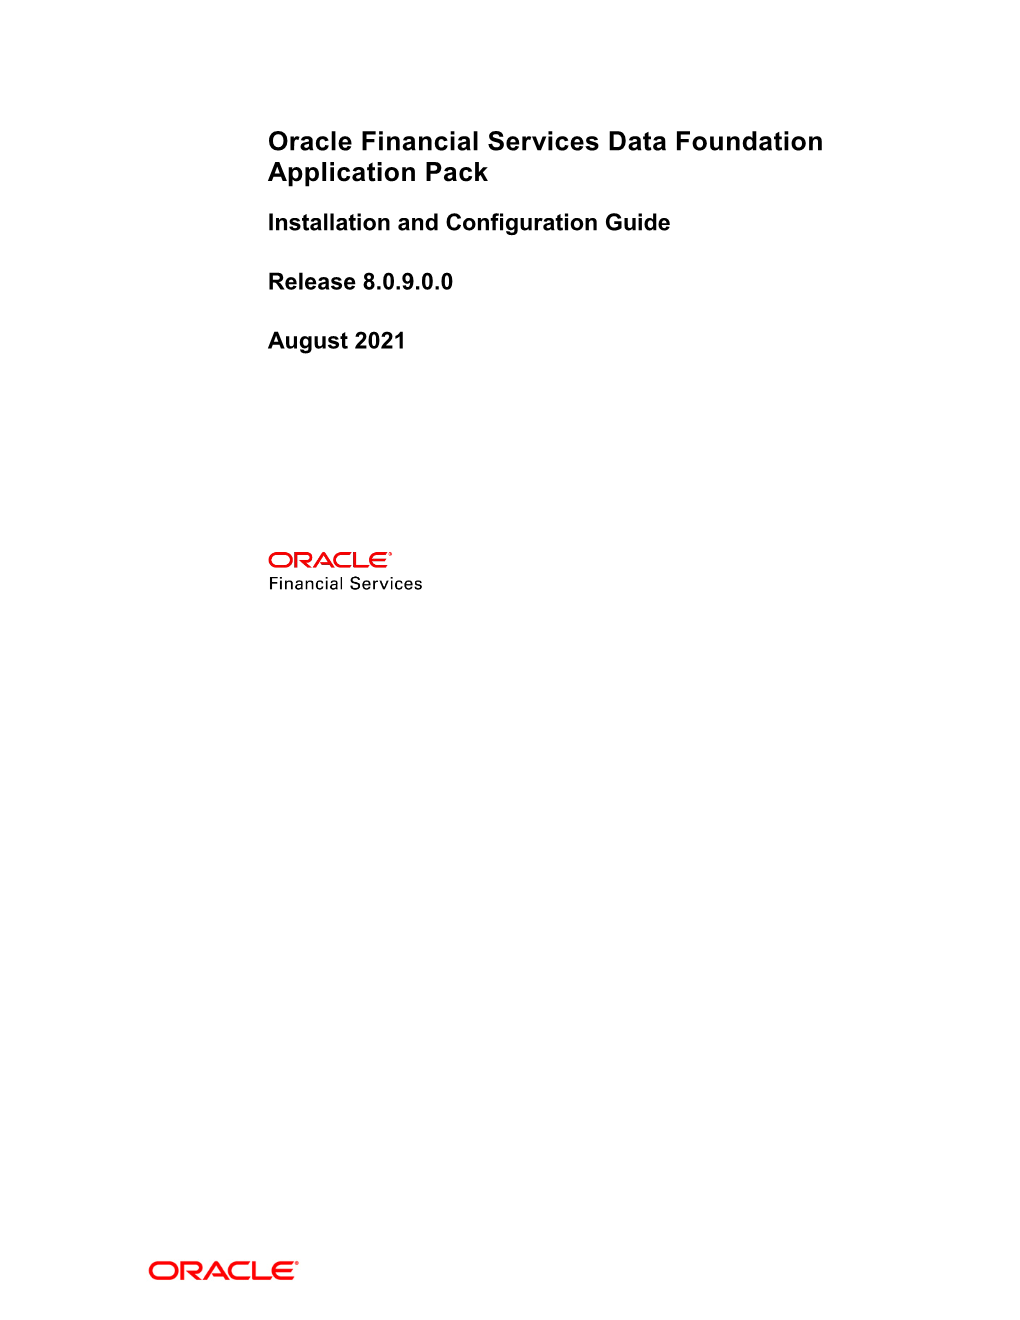 Oracle Financial Services Data Foundation Application Pack